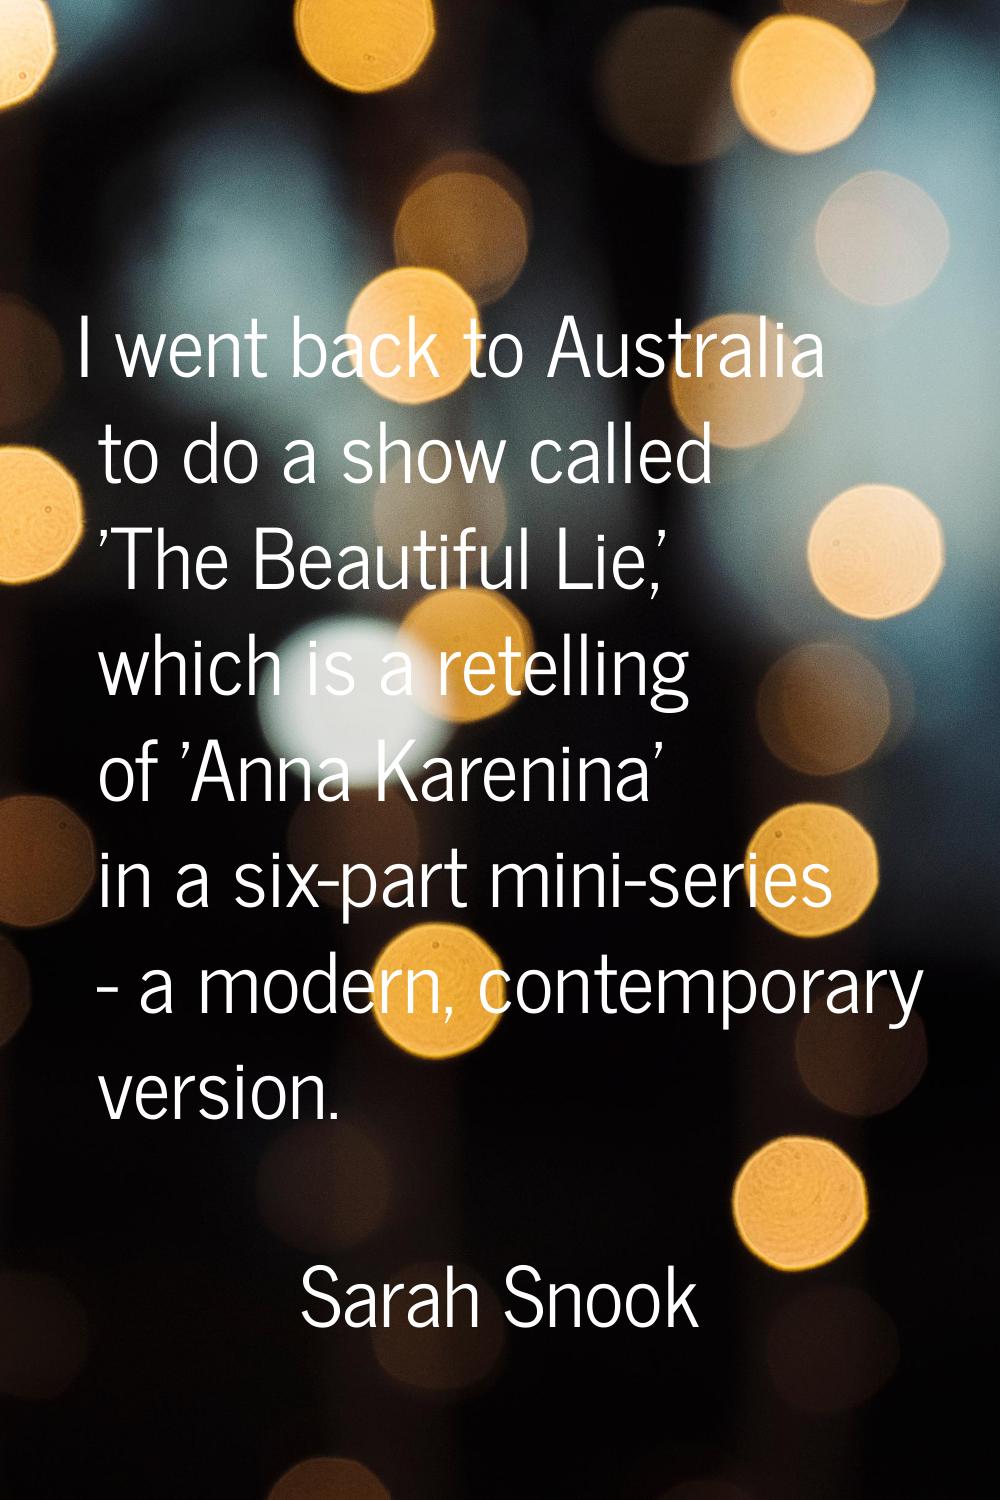 I went back to Australia to do a show called 'The Beautiful Lie,' which is a retelling of 'Anna Kar